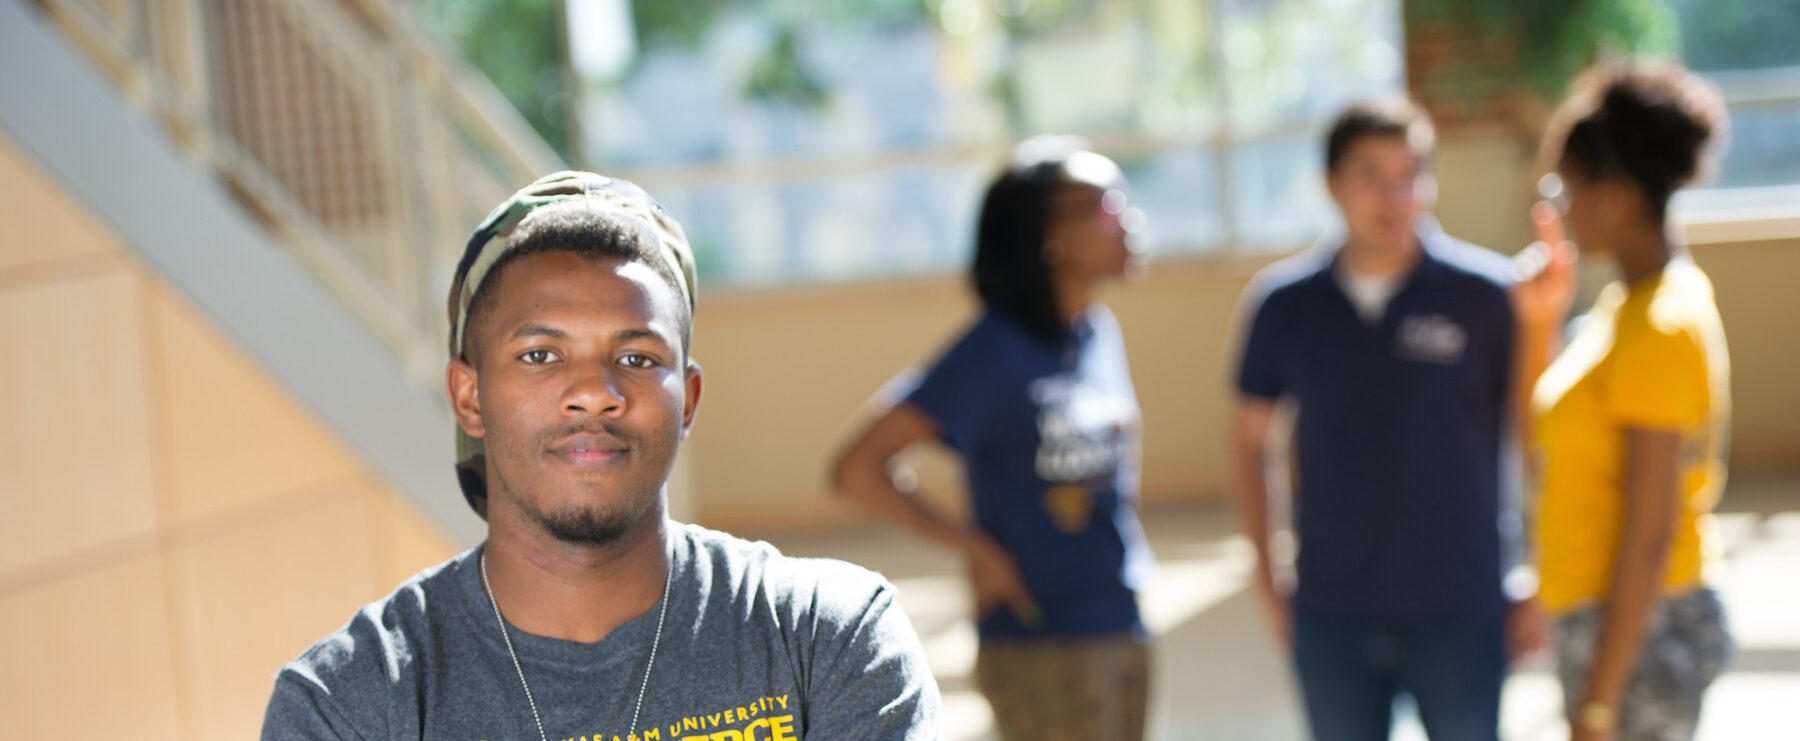 Student wearing a TAMUC shirt on campus.